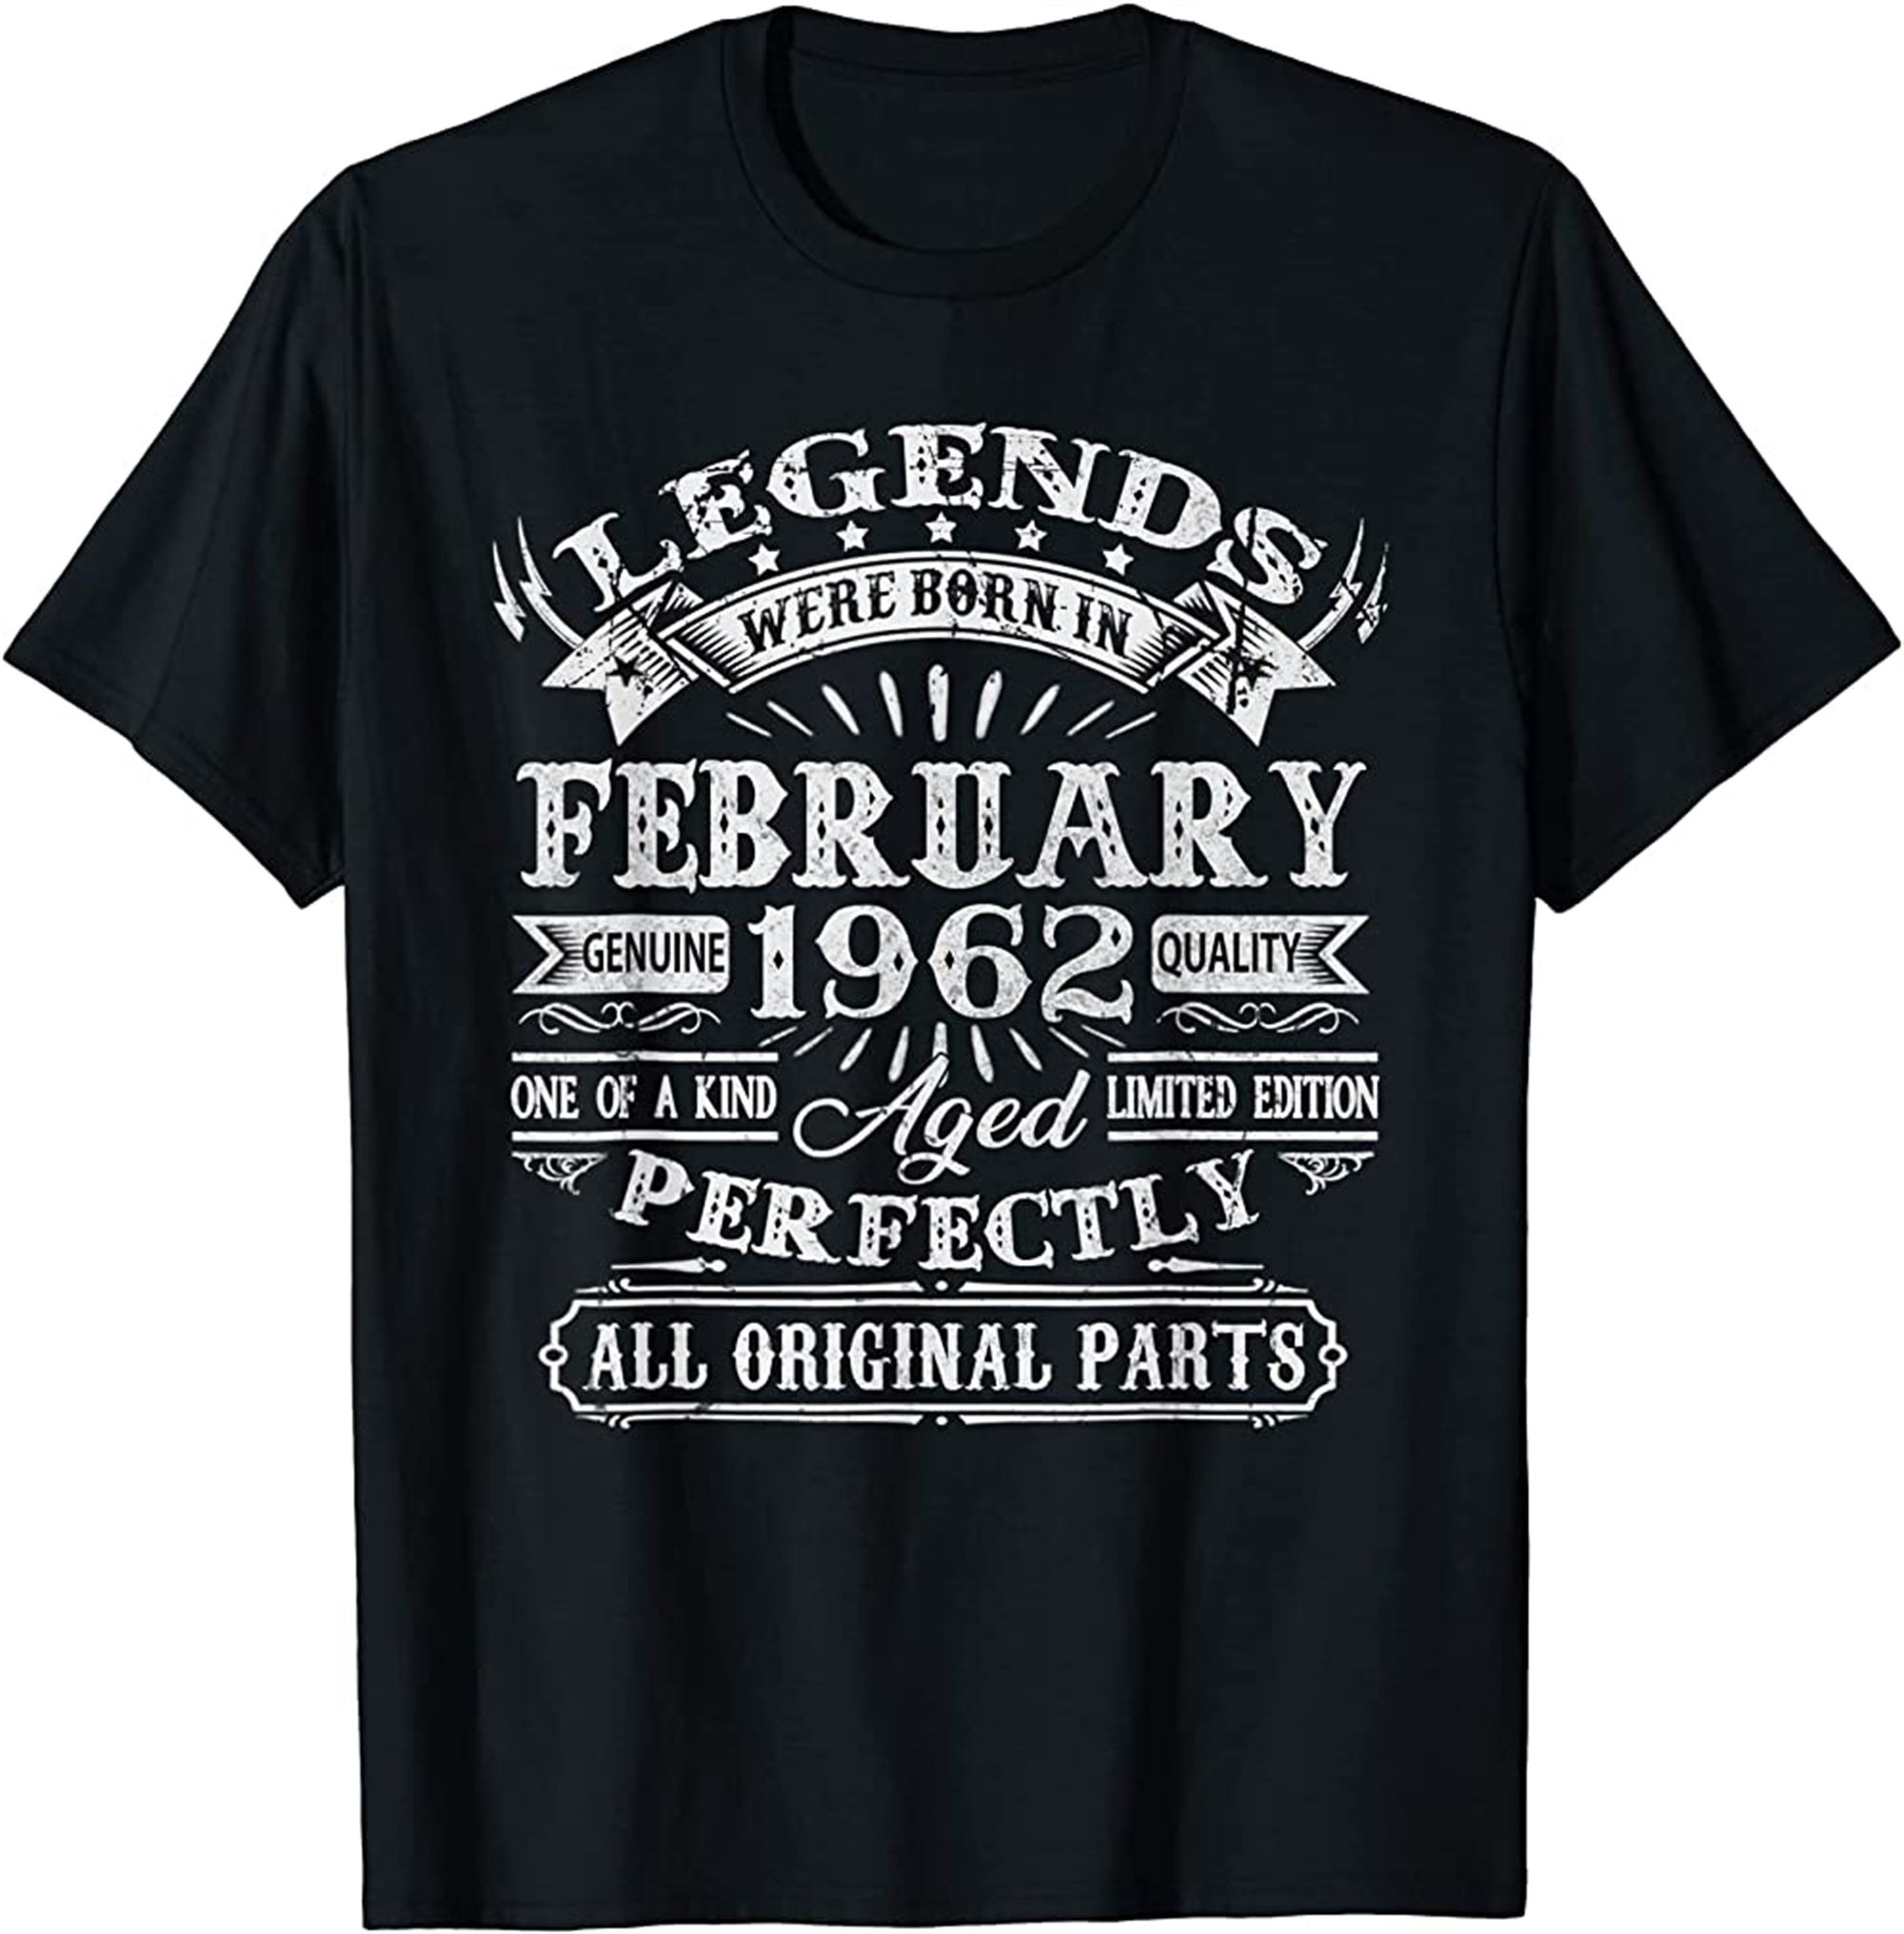 Mens Legends Were Born In February 1962 60th Birthday Gifts T-shirt Full Size Up To 5xl